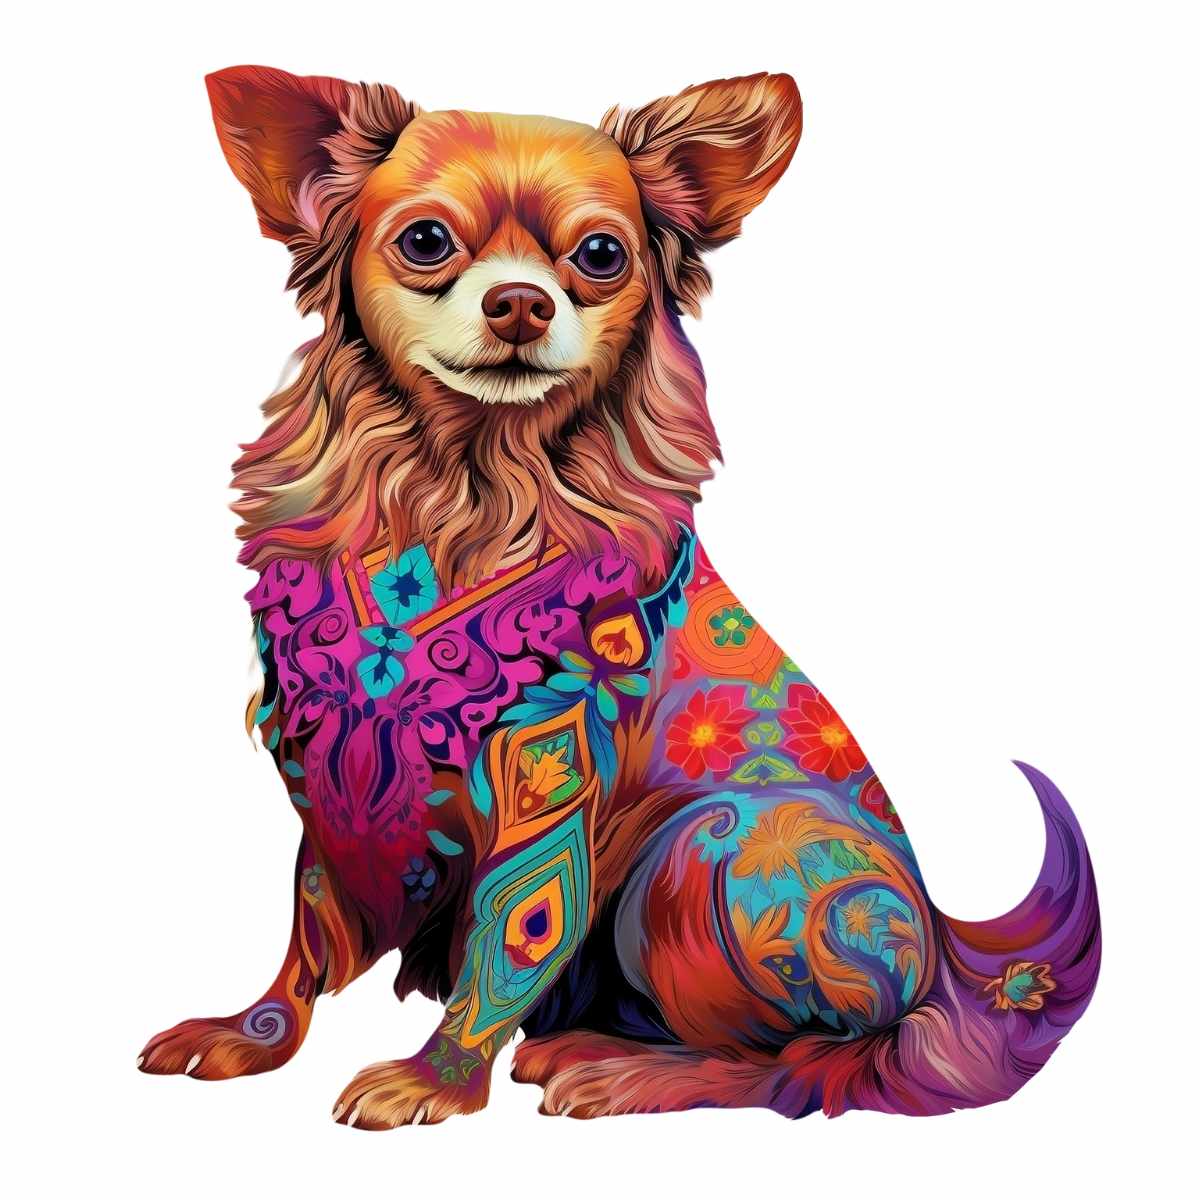 Animal Jigsaw Puzzle > Wooden Jigsaw Puzzle > Jigsaw Puzzle A3 Chihuahua Dog - Jigsaw Puzzle